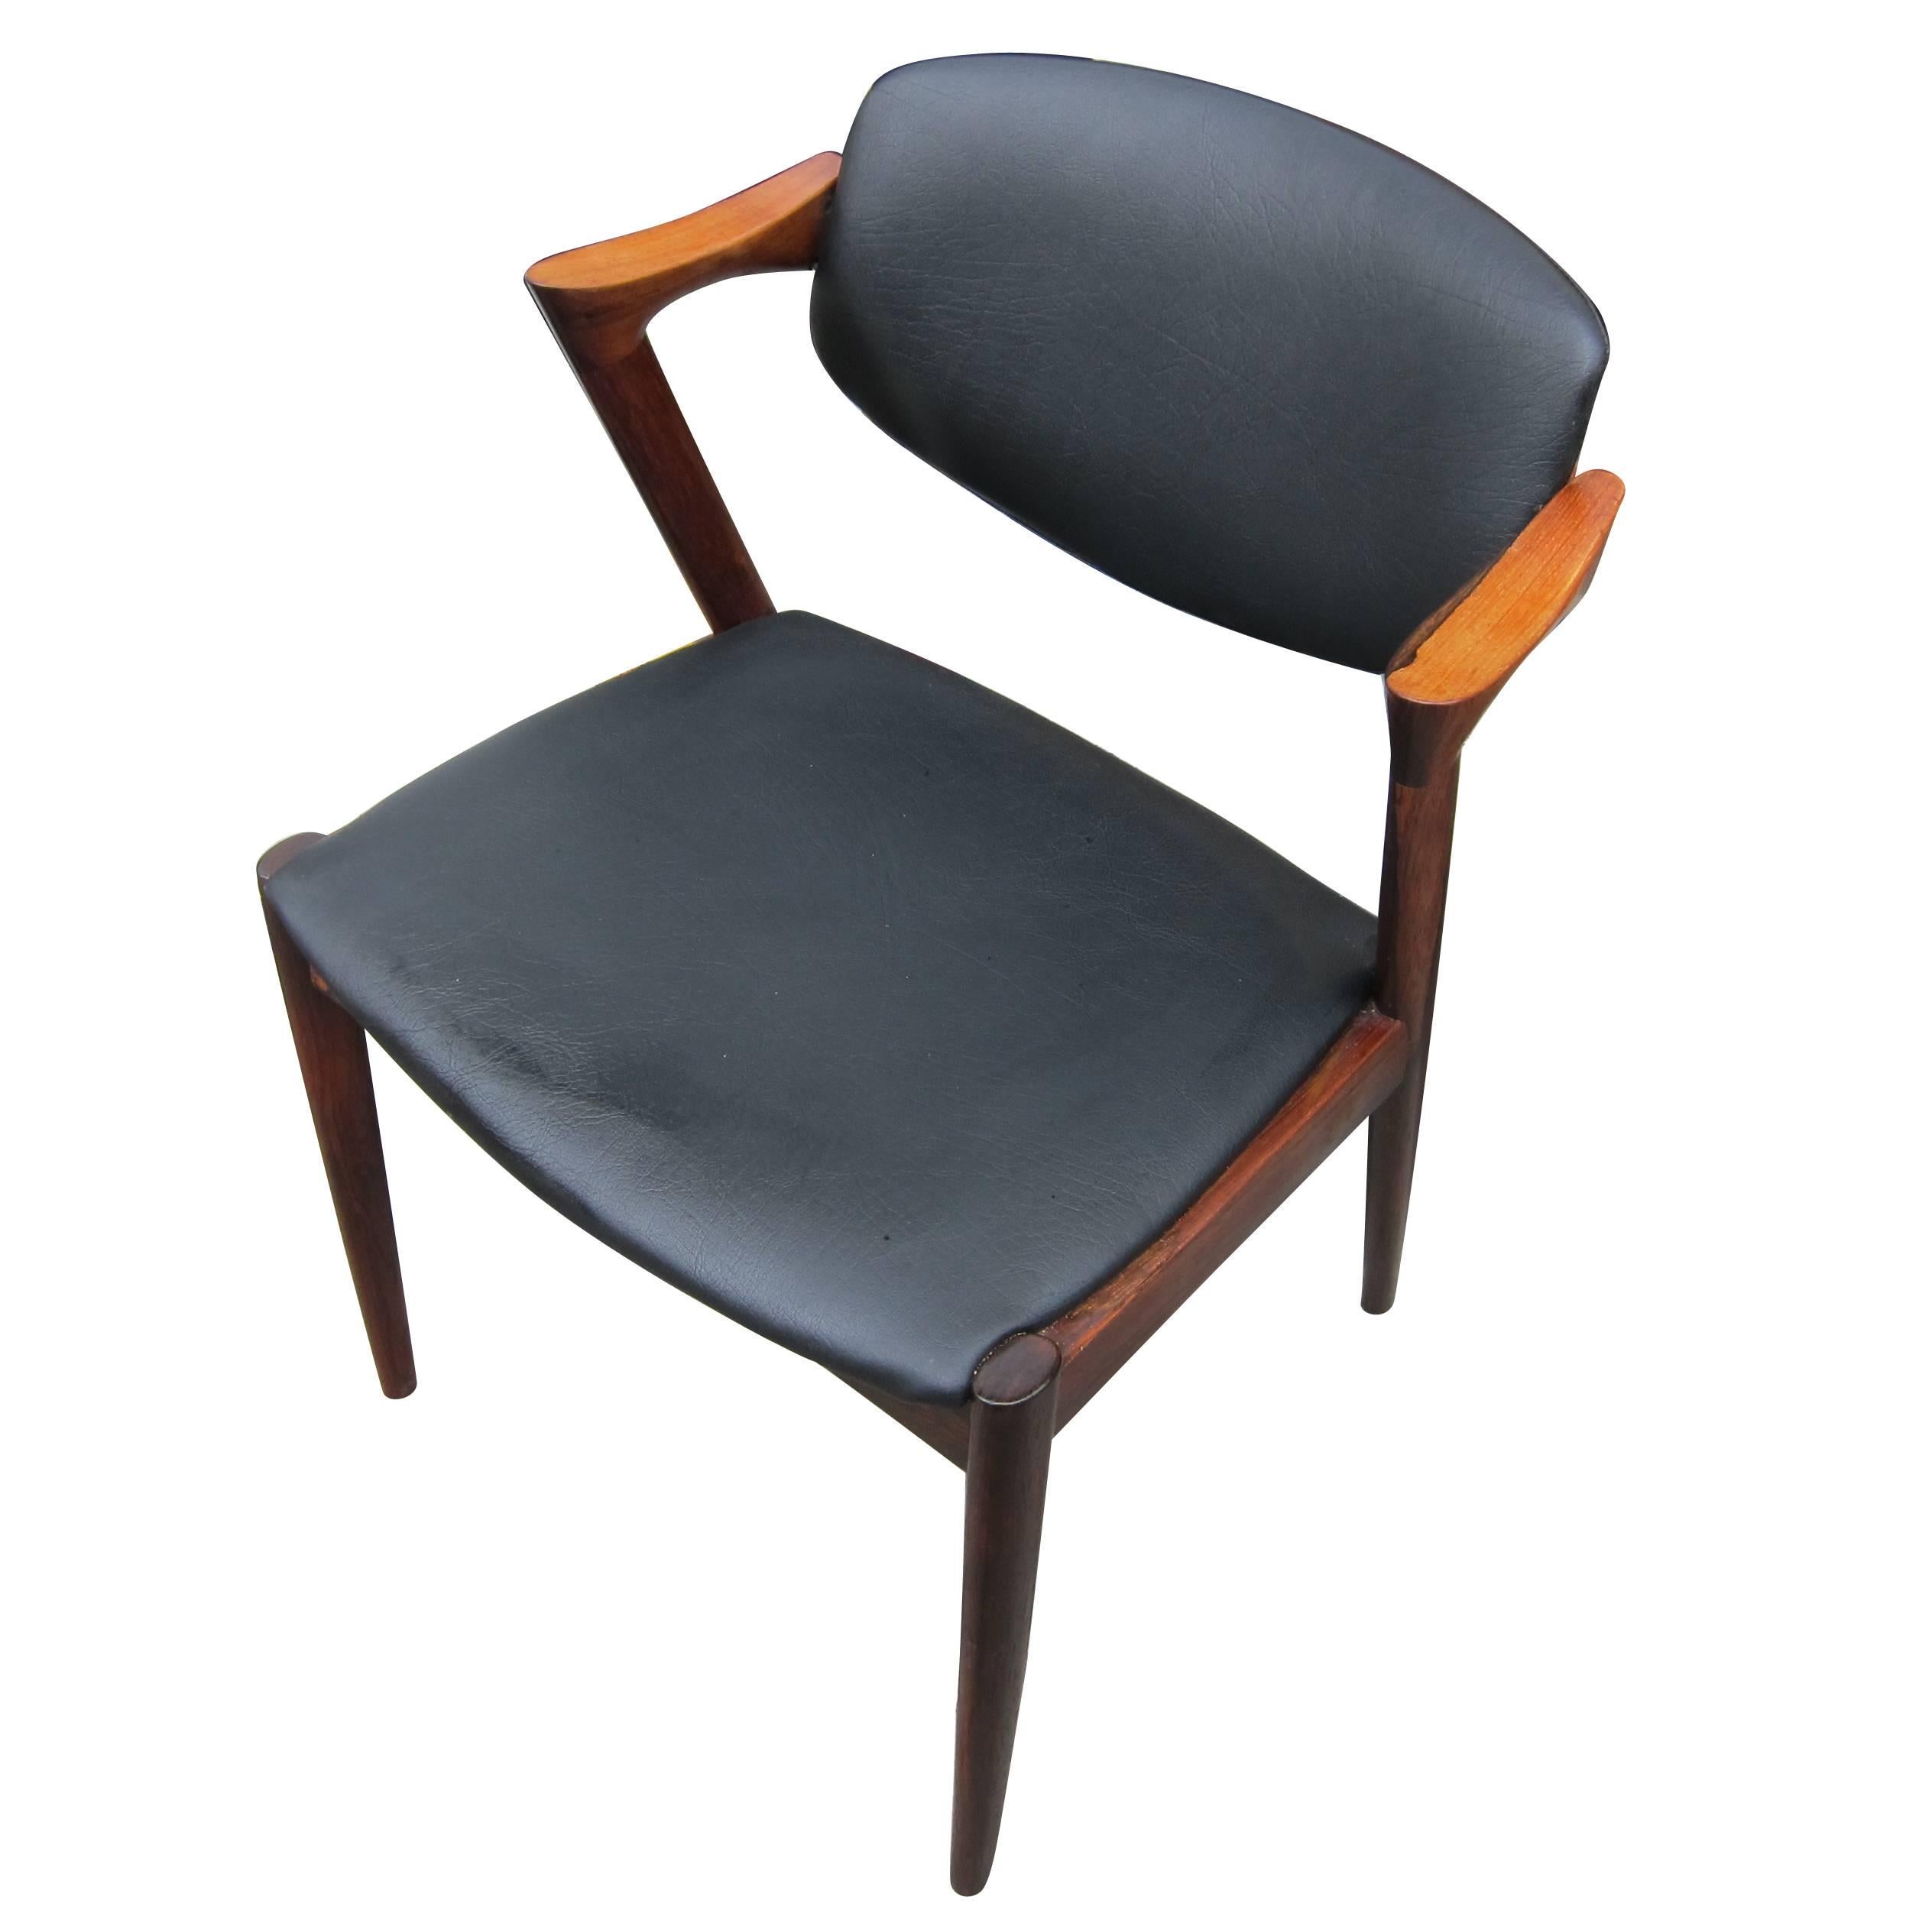 12 Kai Kristiansen, model 42, dining room chairs in rosewood. The chair has a pivoting back and smooth curves. They are all refurnished and come with new ebbing straps.

They are in excellent vintage condition.

Up to 12 rosewood chairs available